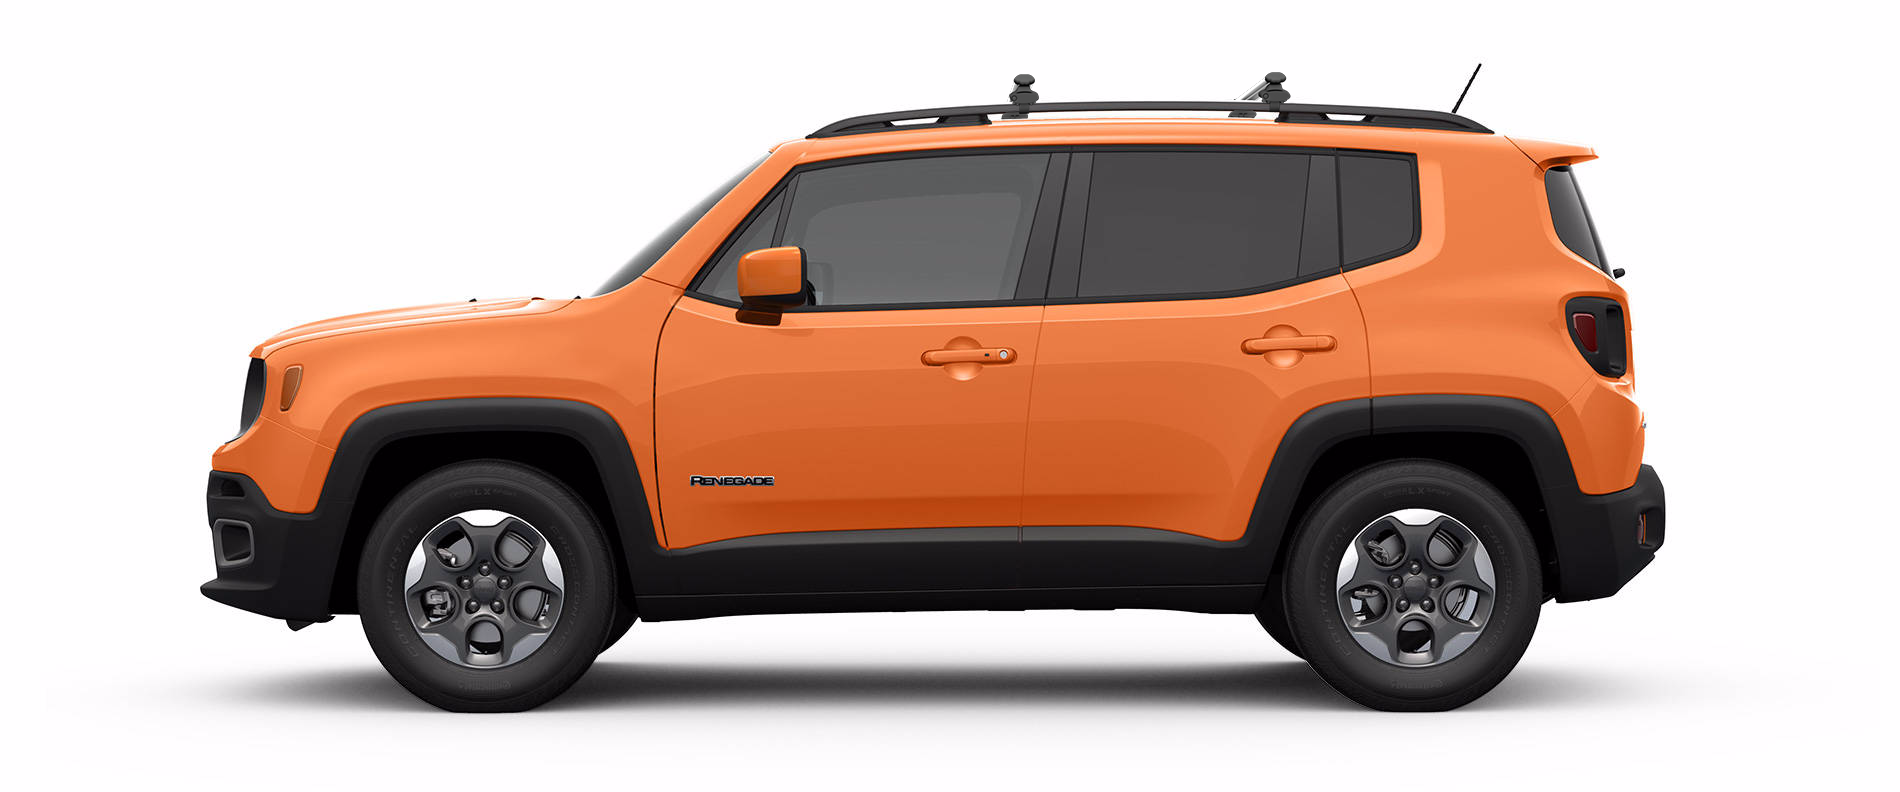 Jeep Renegade Sport FWD side view